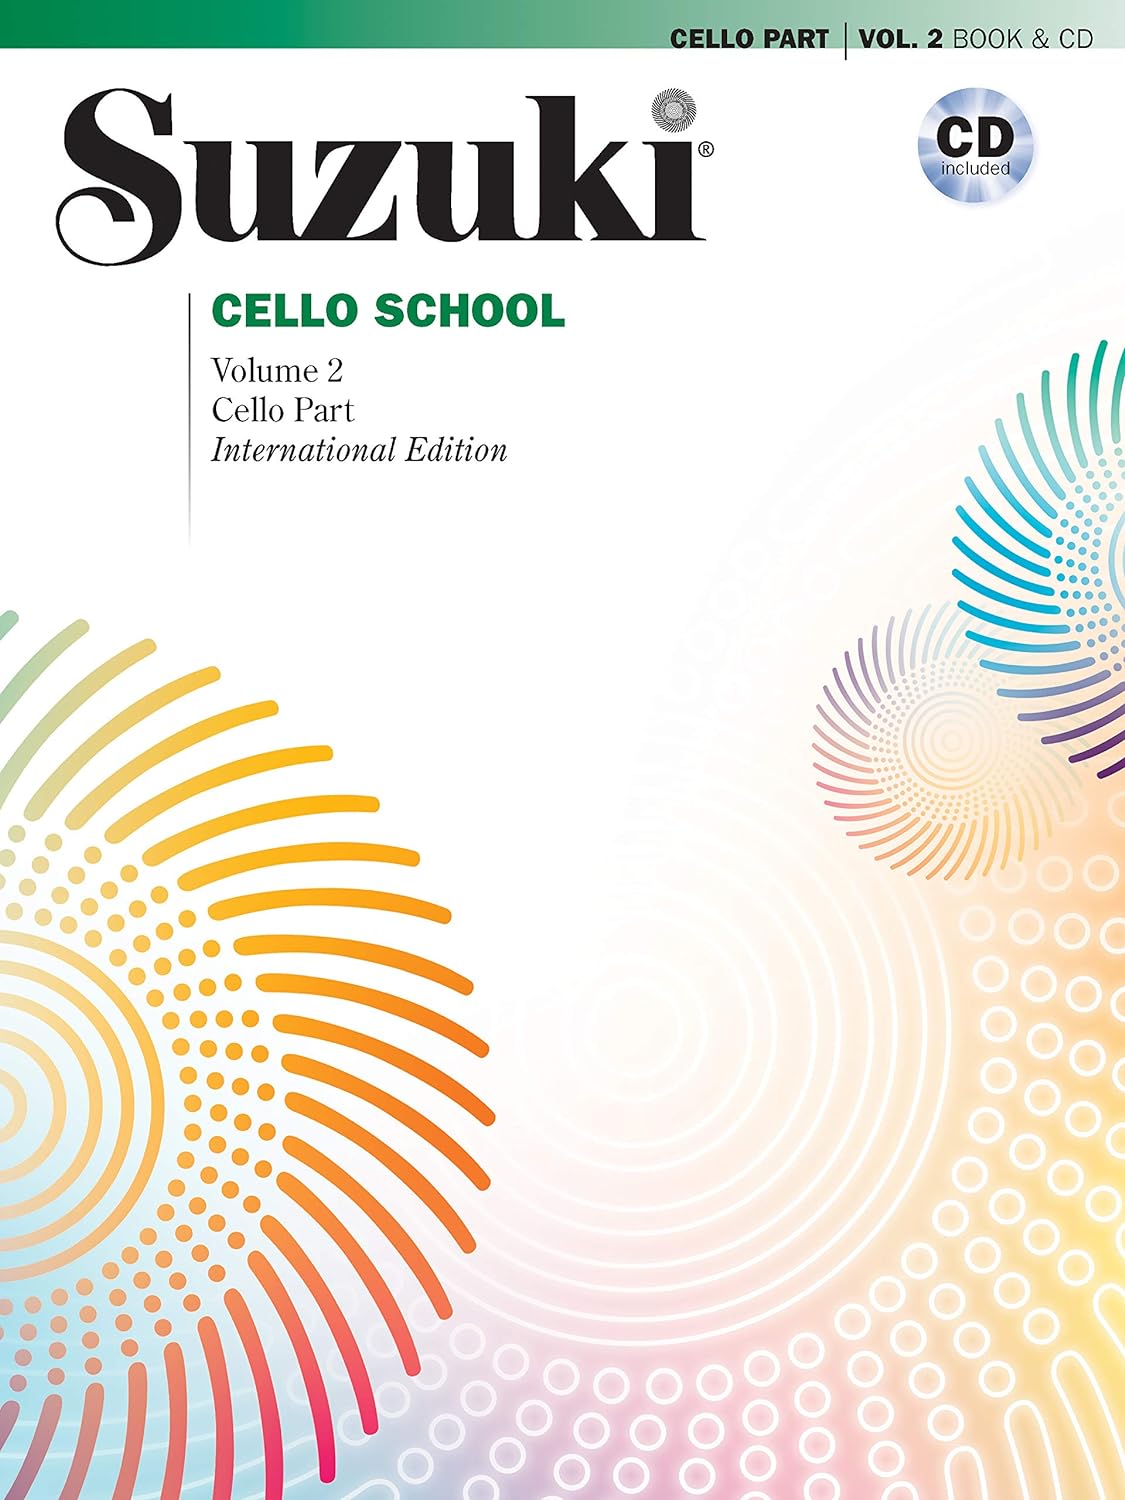 ABRSM Cello Scales G6-8/12 Piano Traders